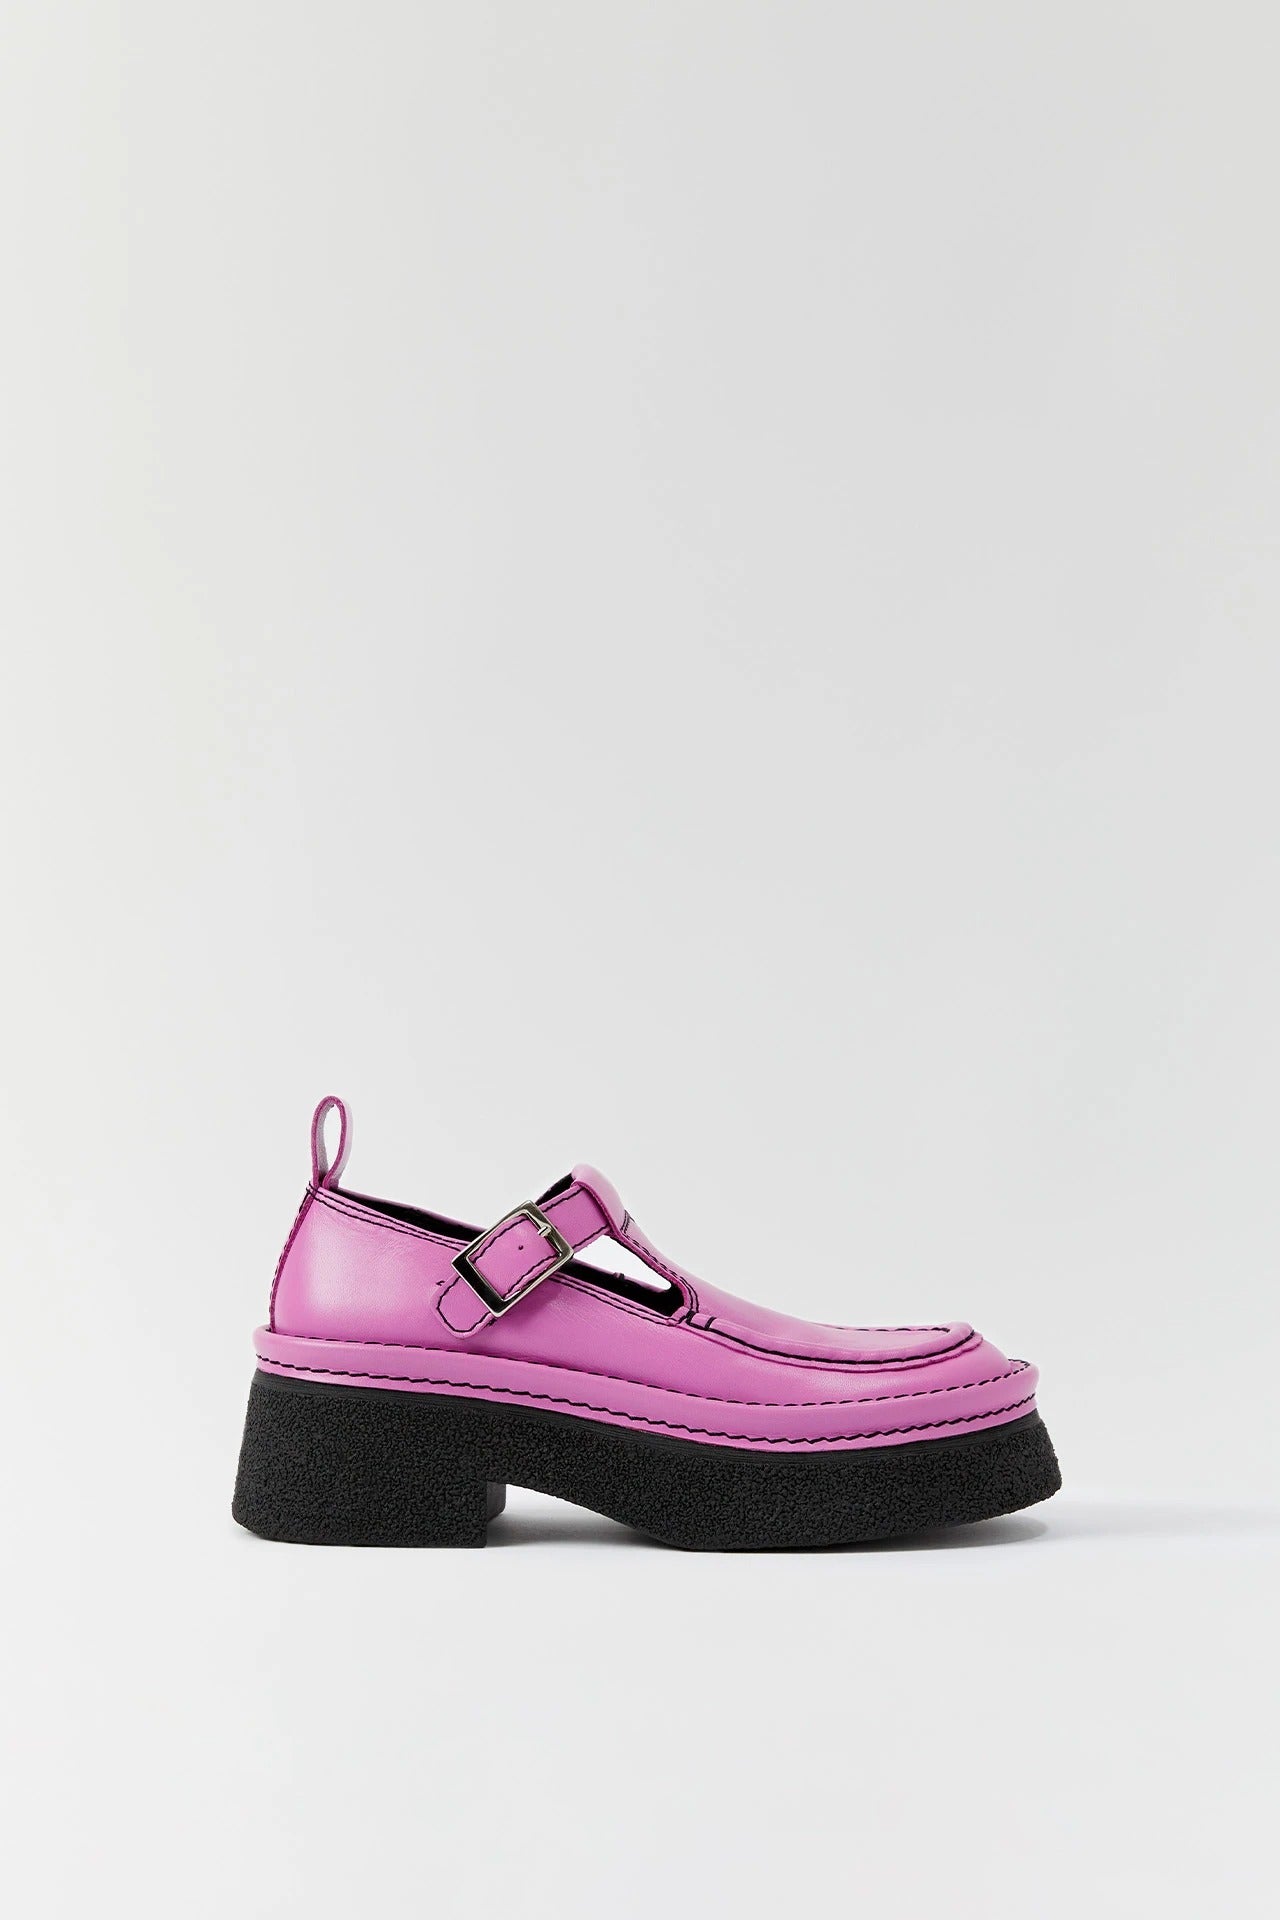 Miista + Cathy Pink Loafers